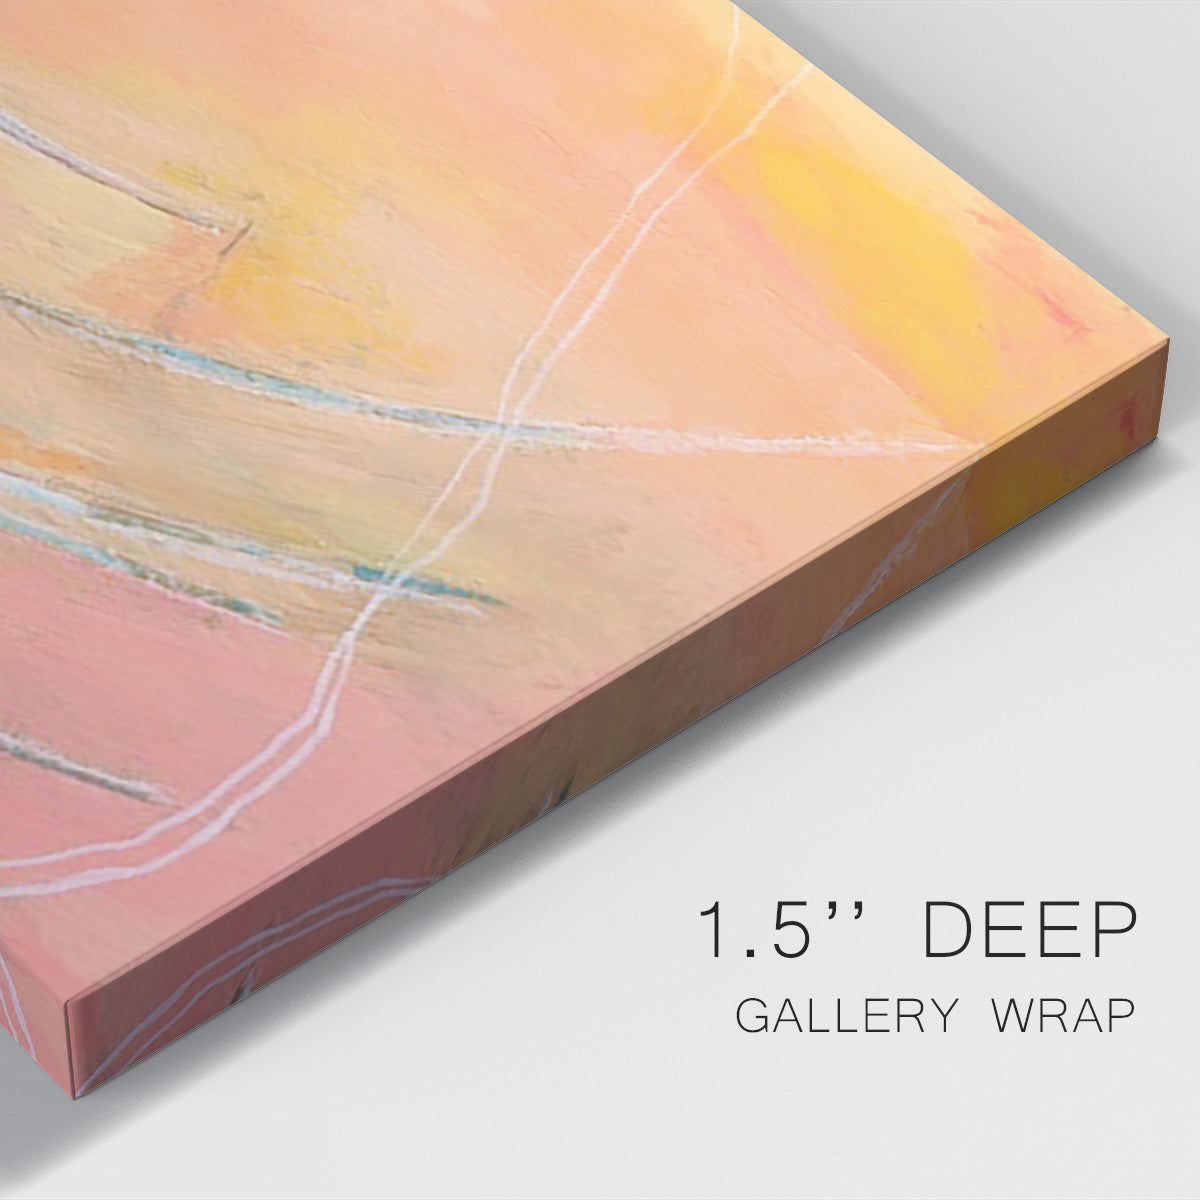 Peach Bliss I Premium Gallery Wrapped Canvas - Ready to Hang